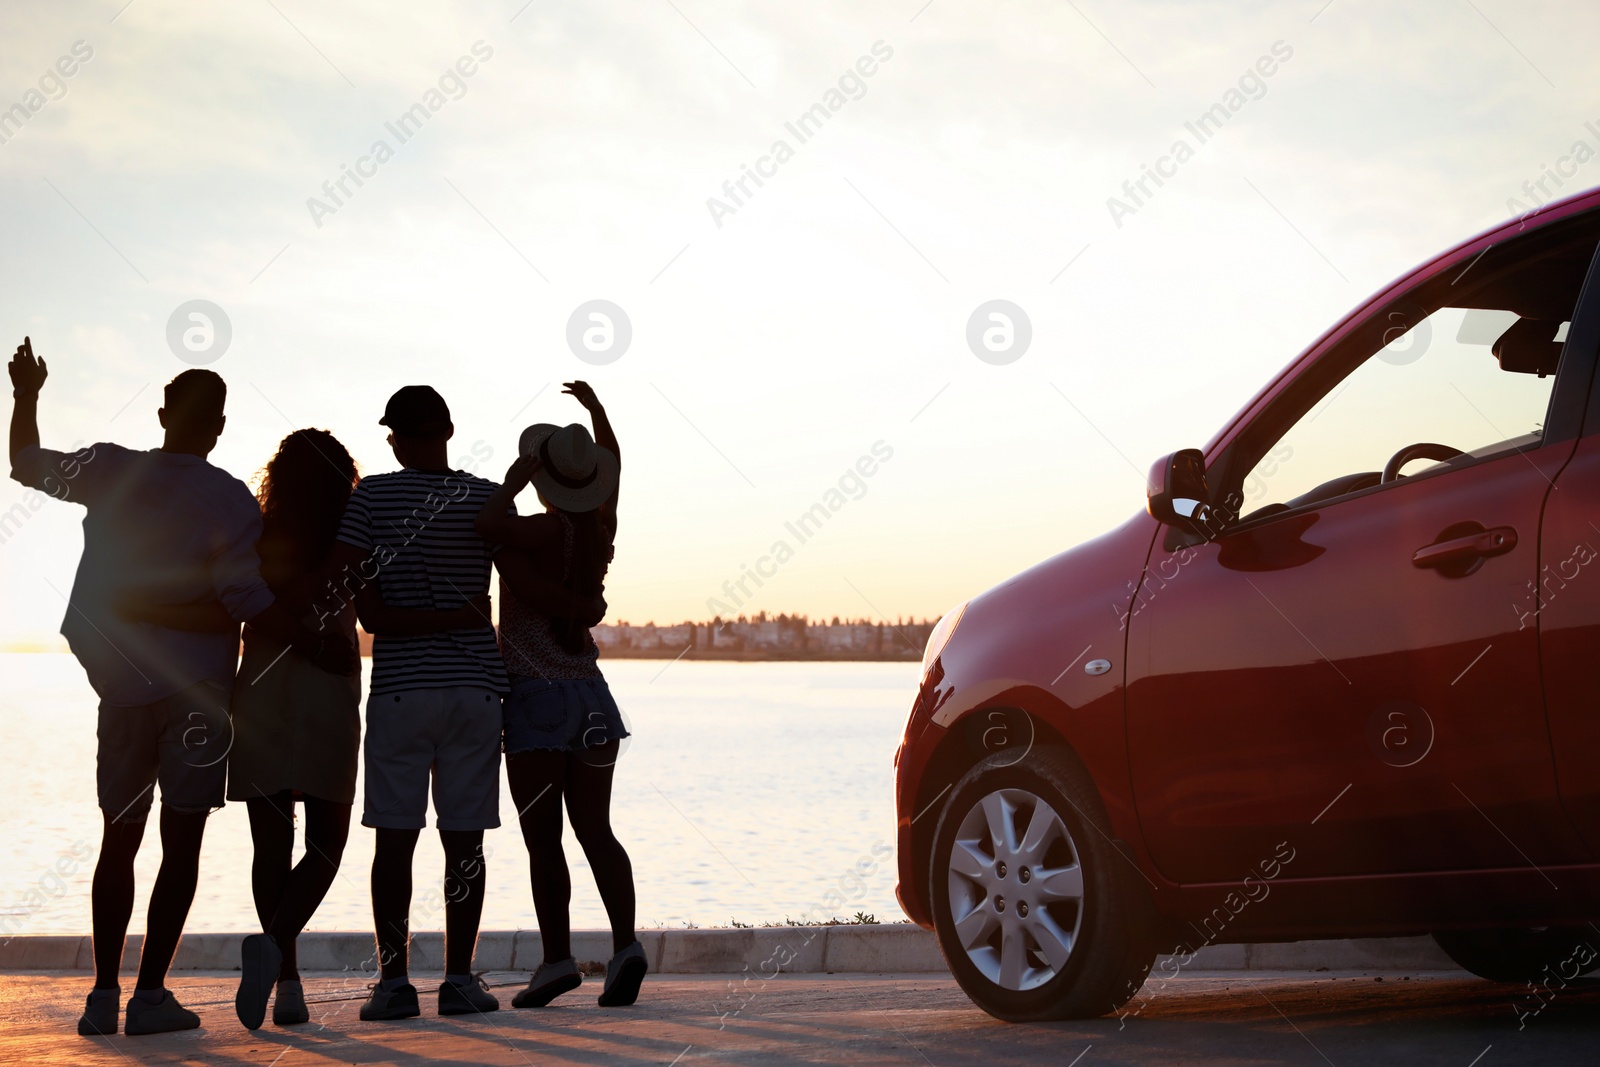 Image of Friends spending time together near car on street, back view. Silhouettes of people at sunset